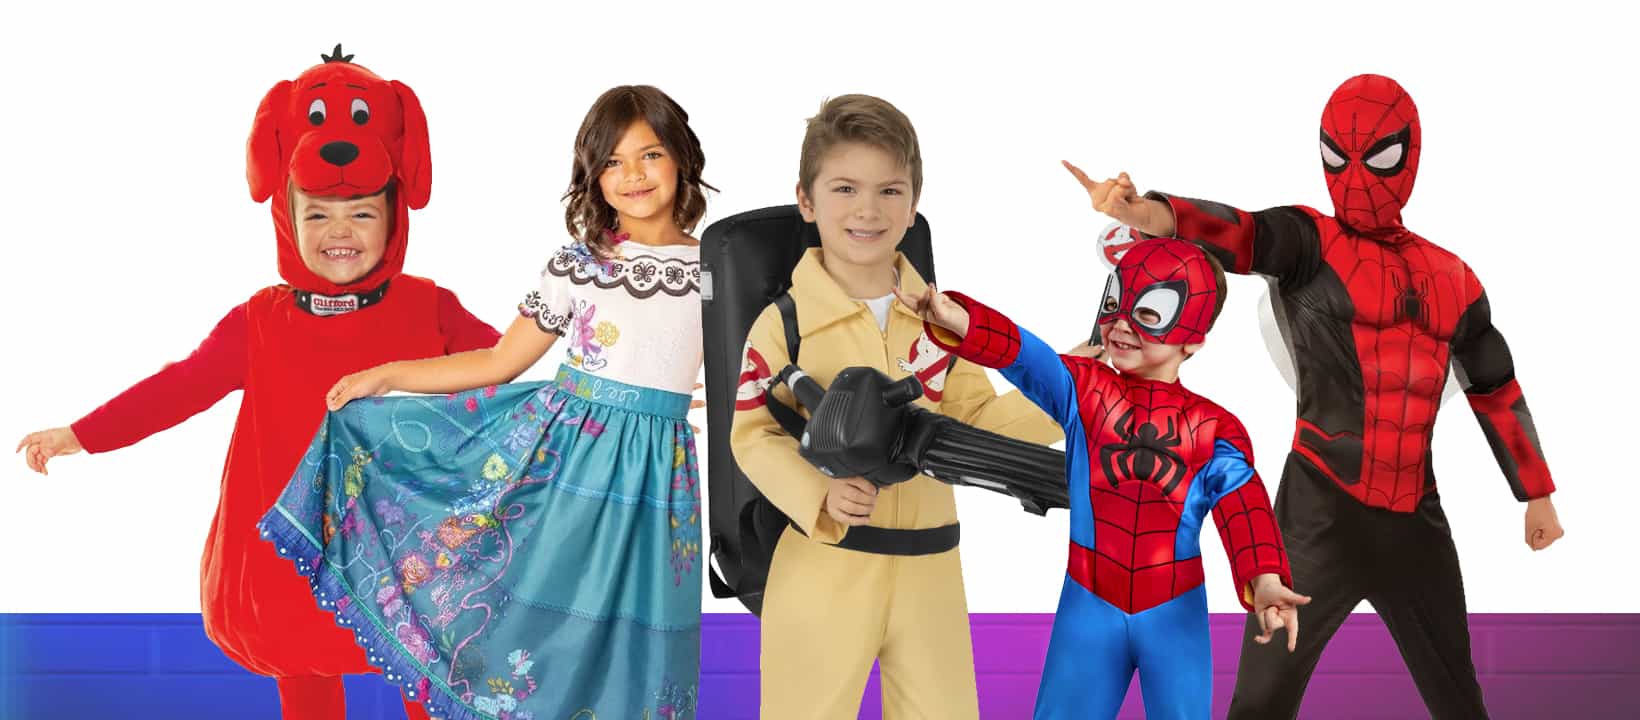 Take a further 50% OFF sale items with this Costumes promo code